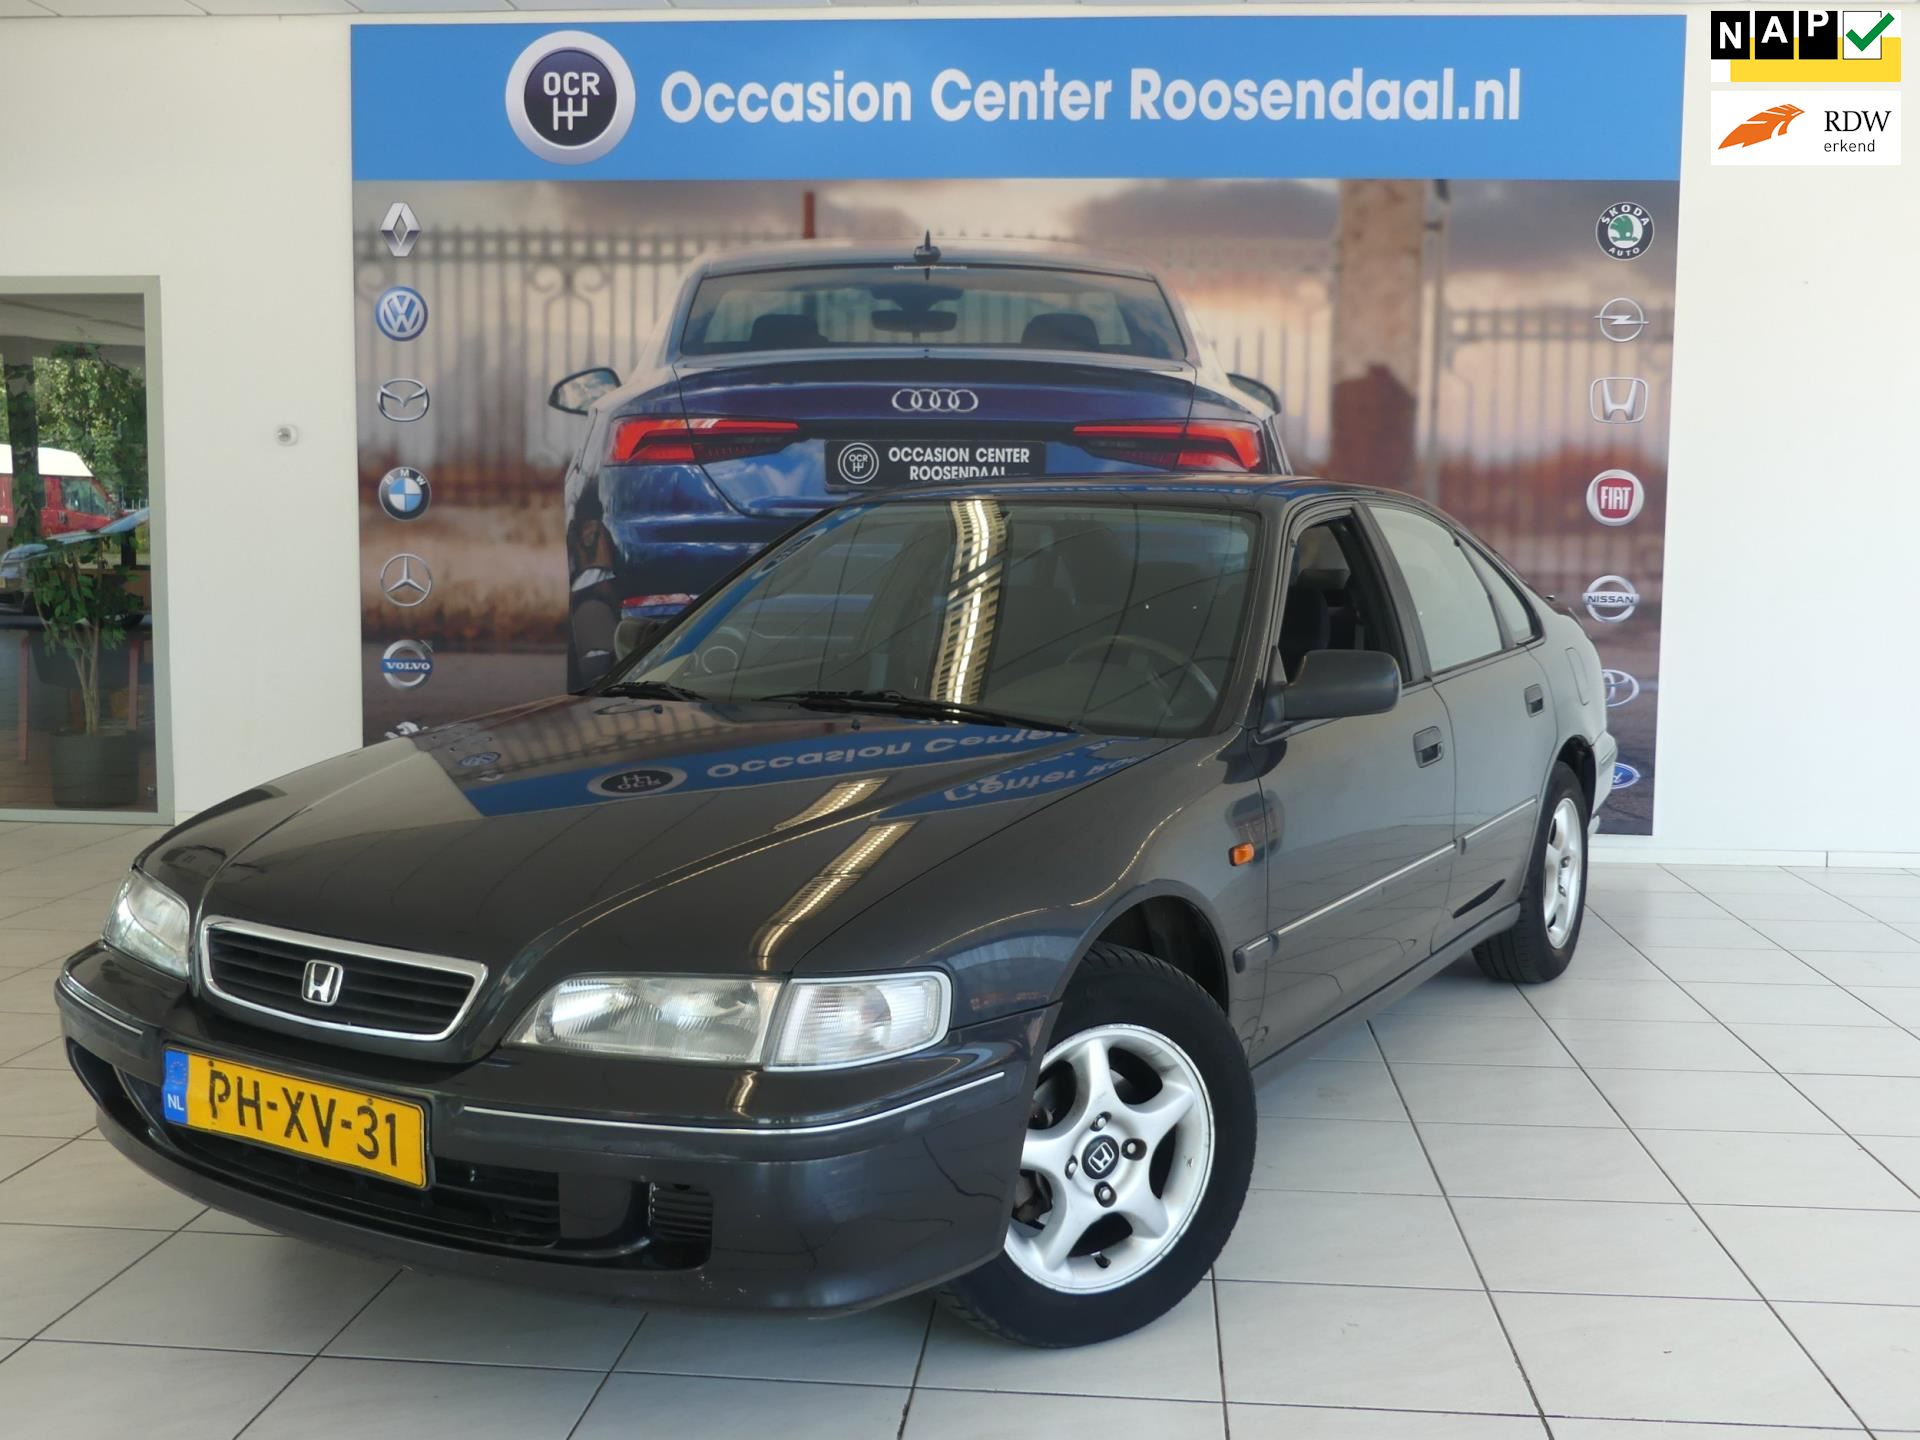 Honda Accord occasion - Occasion Center Roosendaal